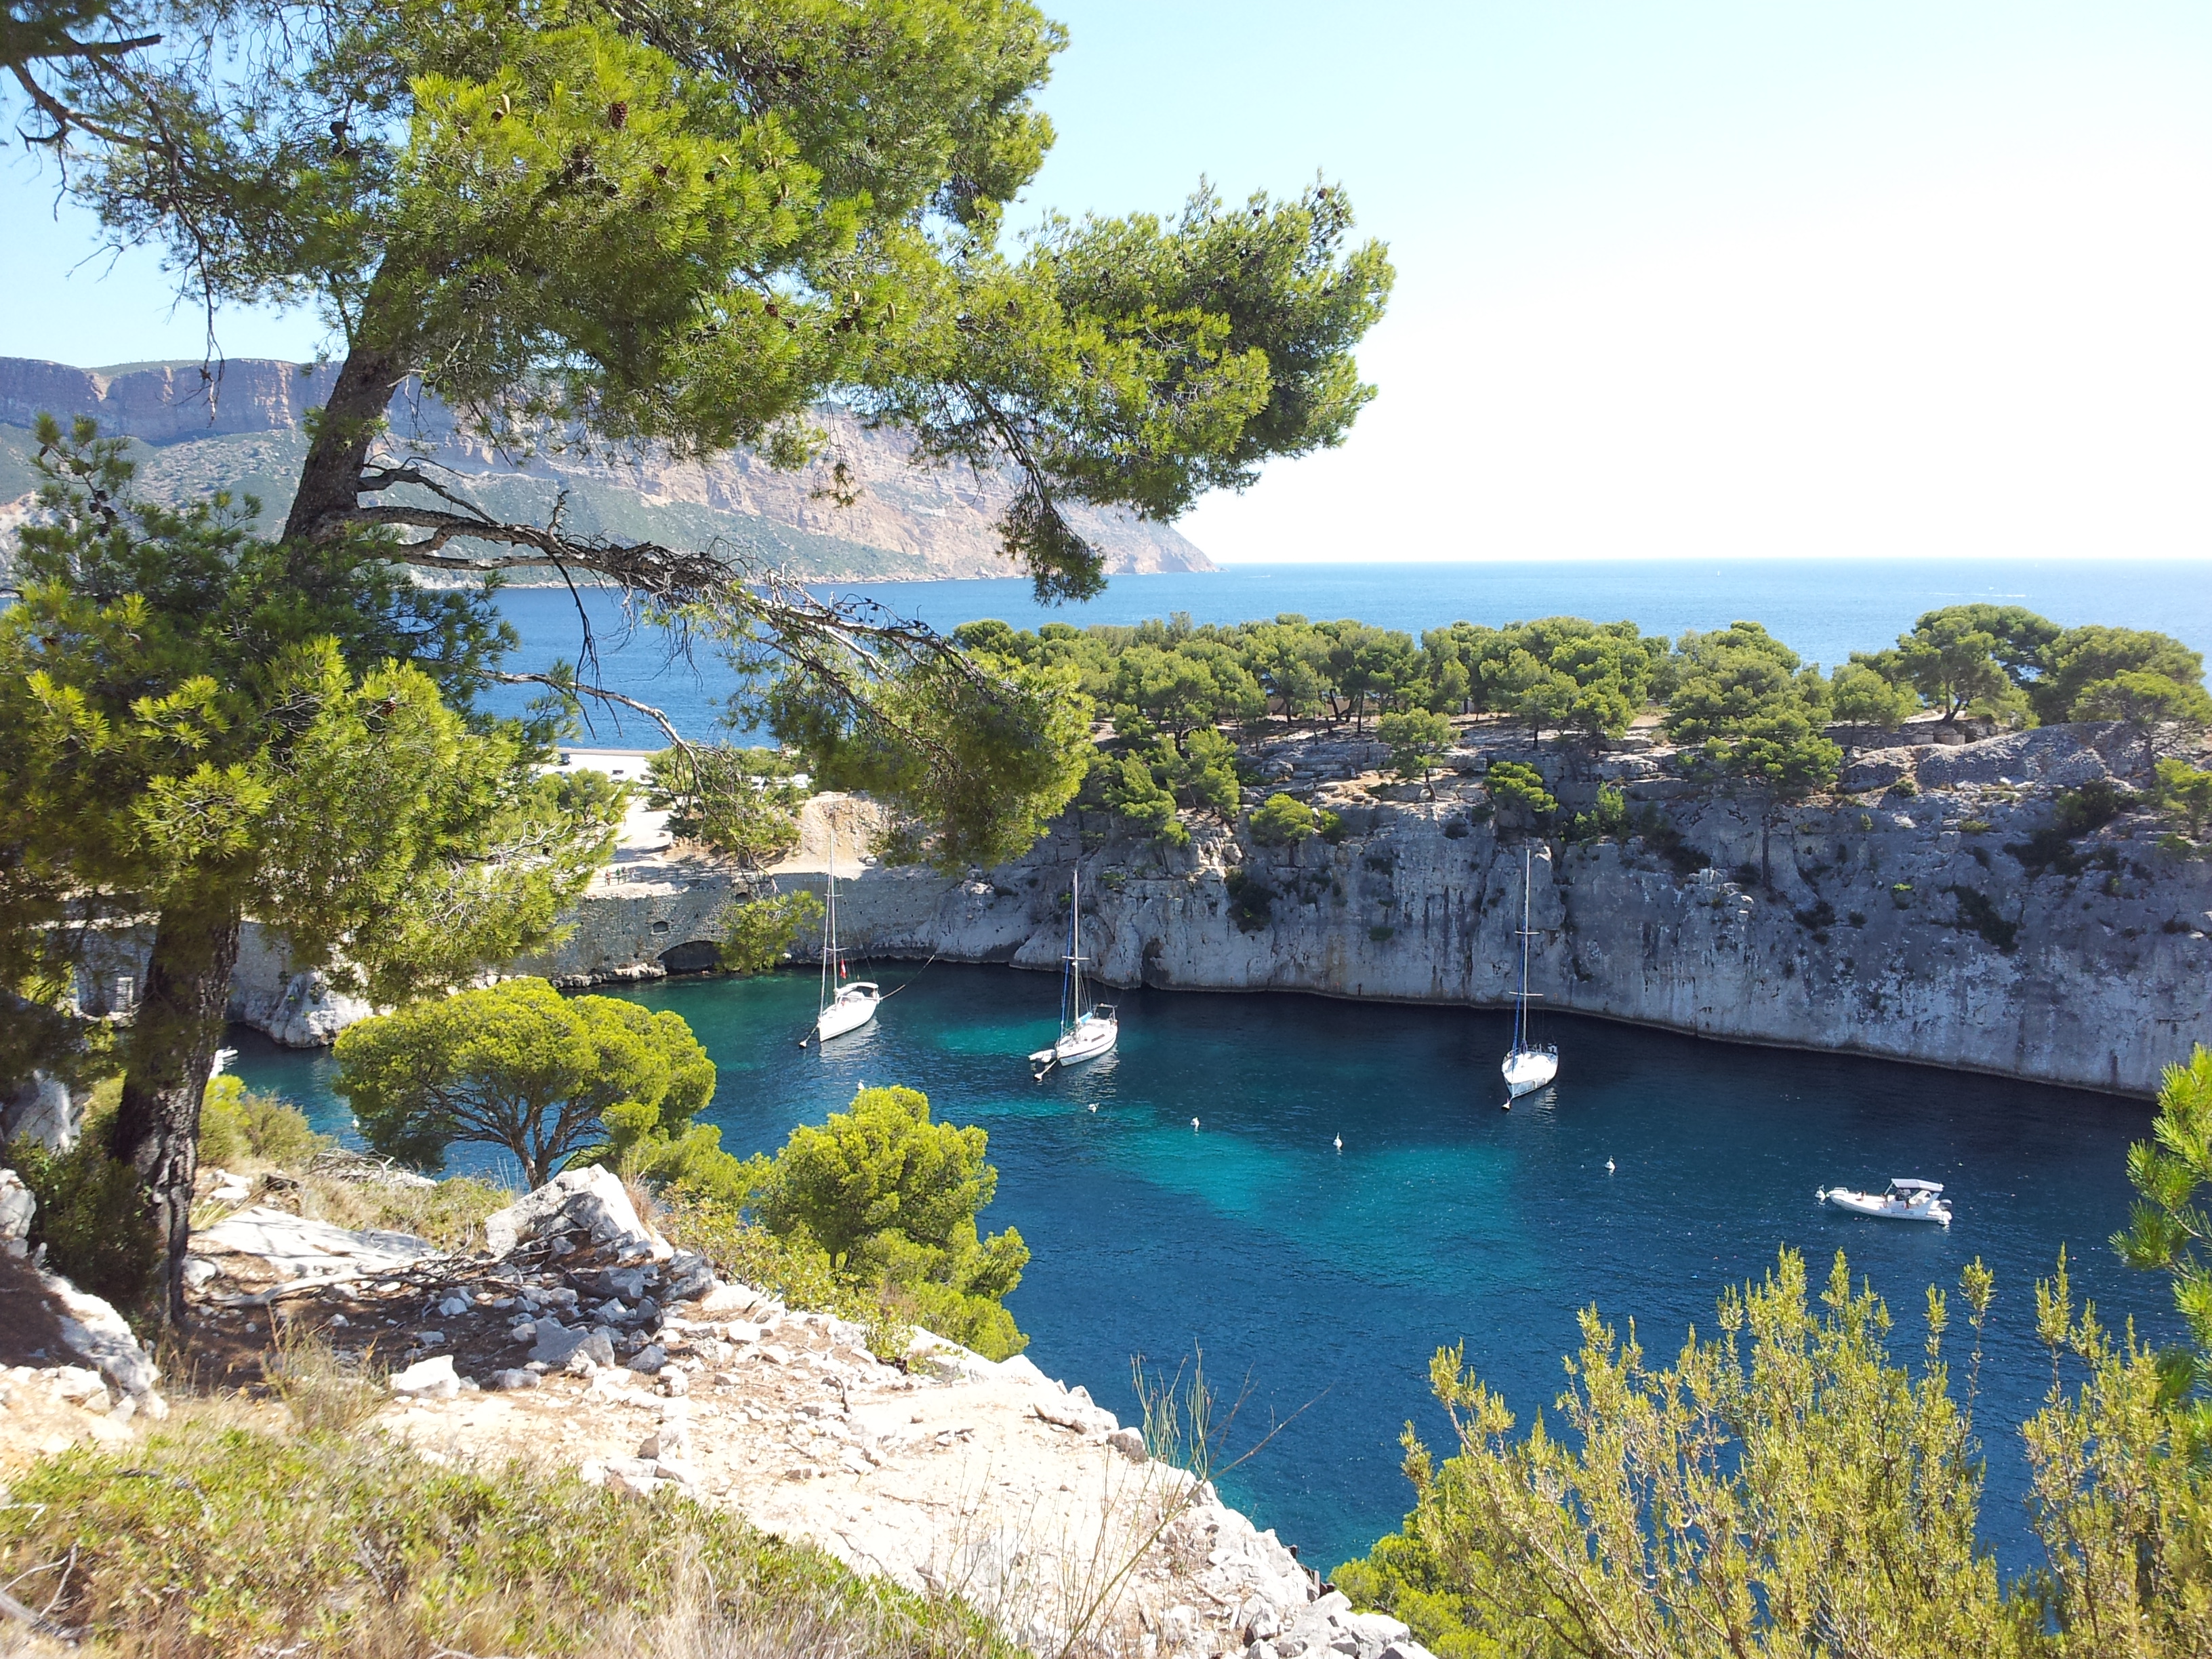 From Calanques to Sainte Victoire